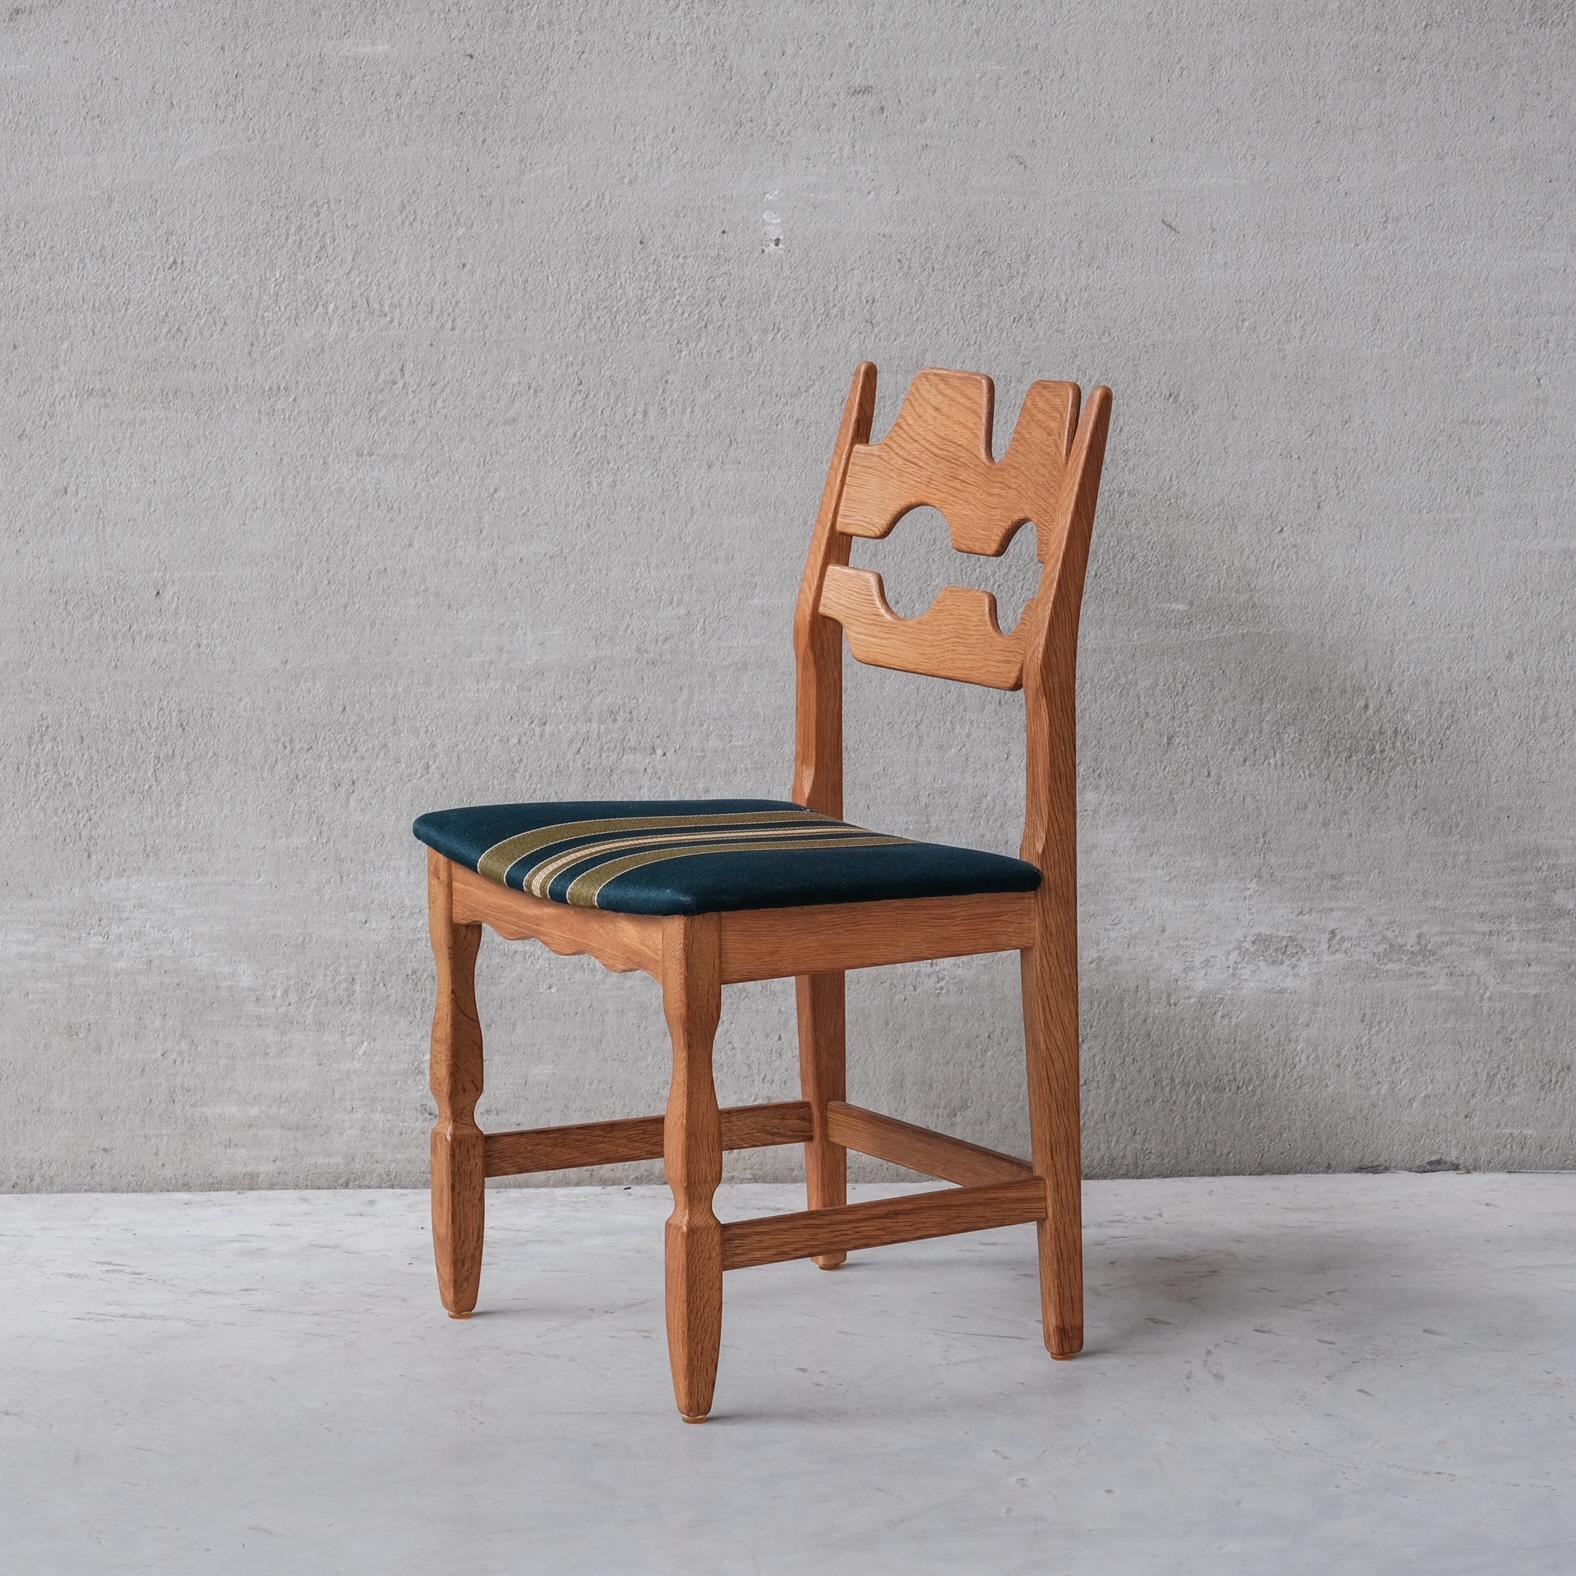 Oak dining chairs by Henning Kjaernulf. A set of four. 

Denmark, c1960s.

'Razor back' or 'Razor blade' model.

Original patina and finish. 

Original upholstery has been retained but normally has signs of use and age. We can update these